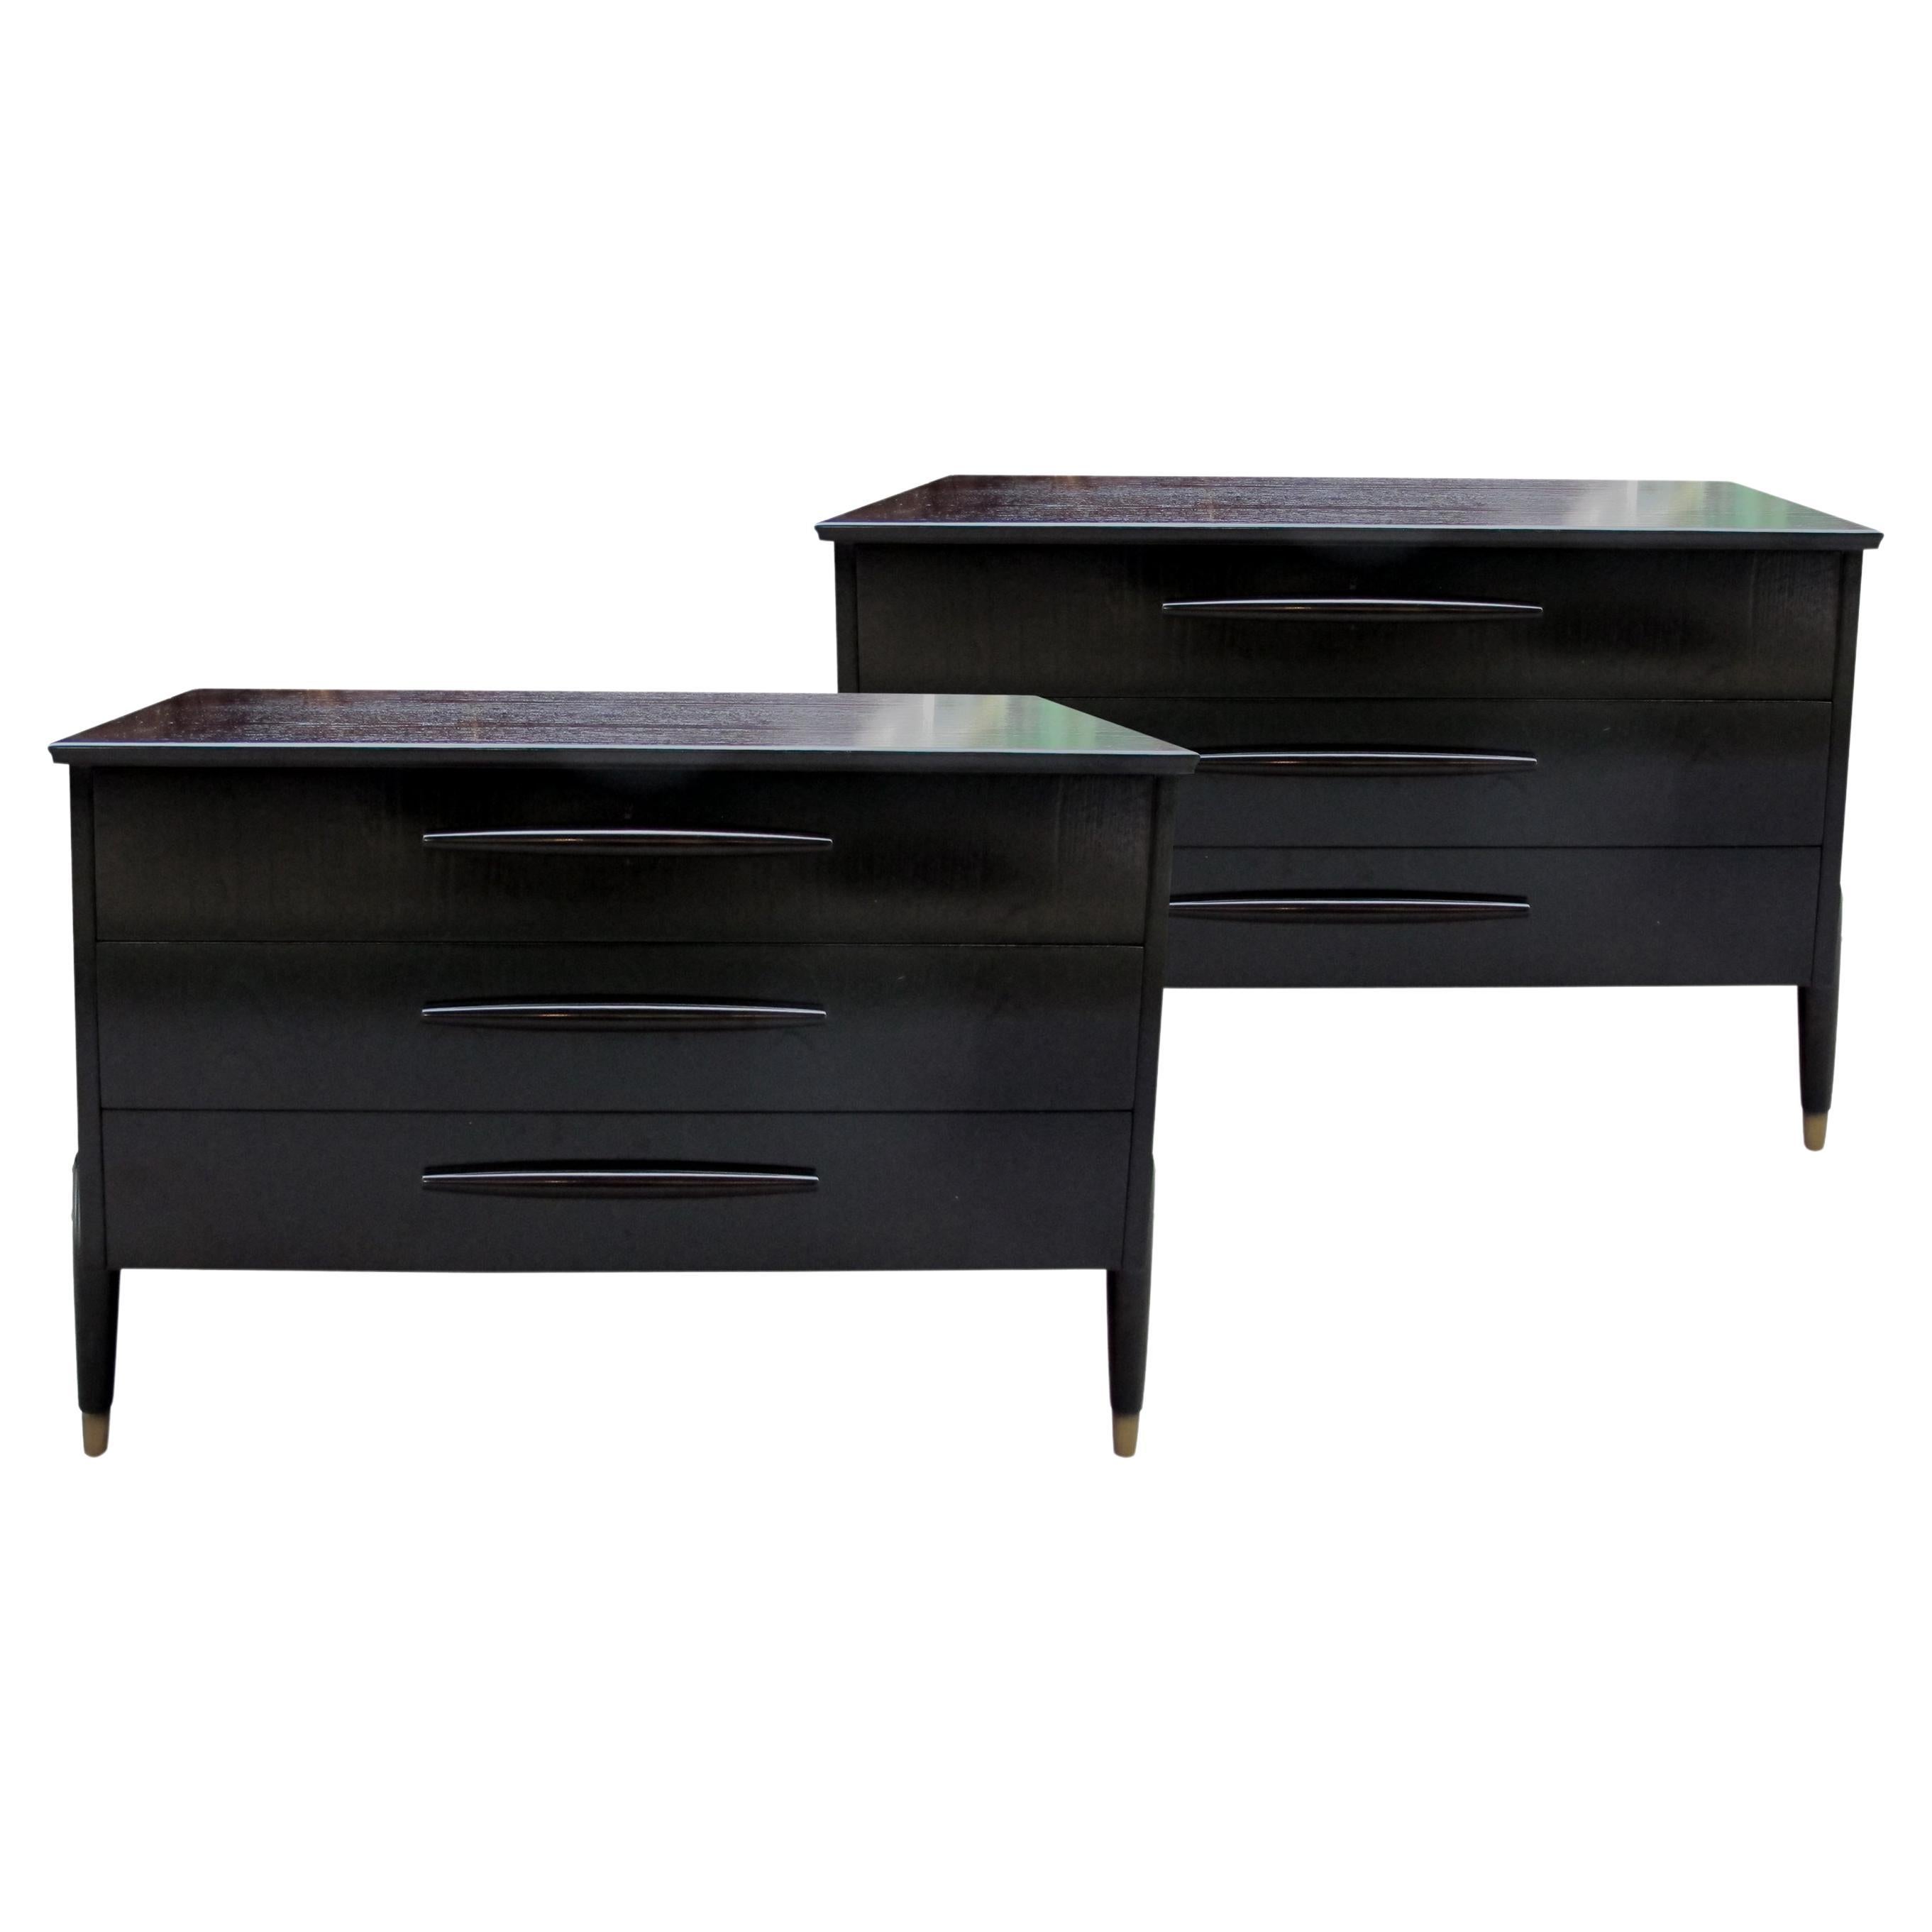 Pair of Scandinavian Teak Chests of Drawers, Mid-Century Modern For Sale